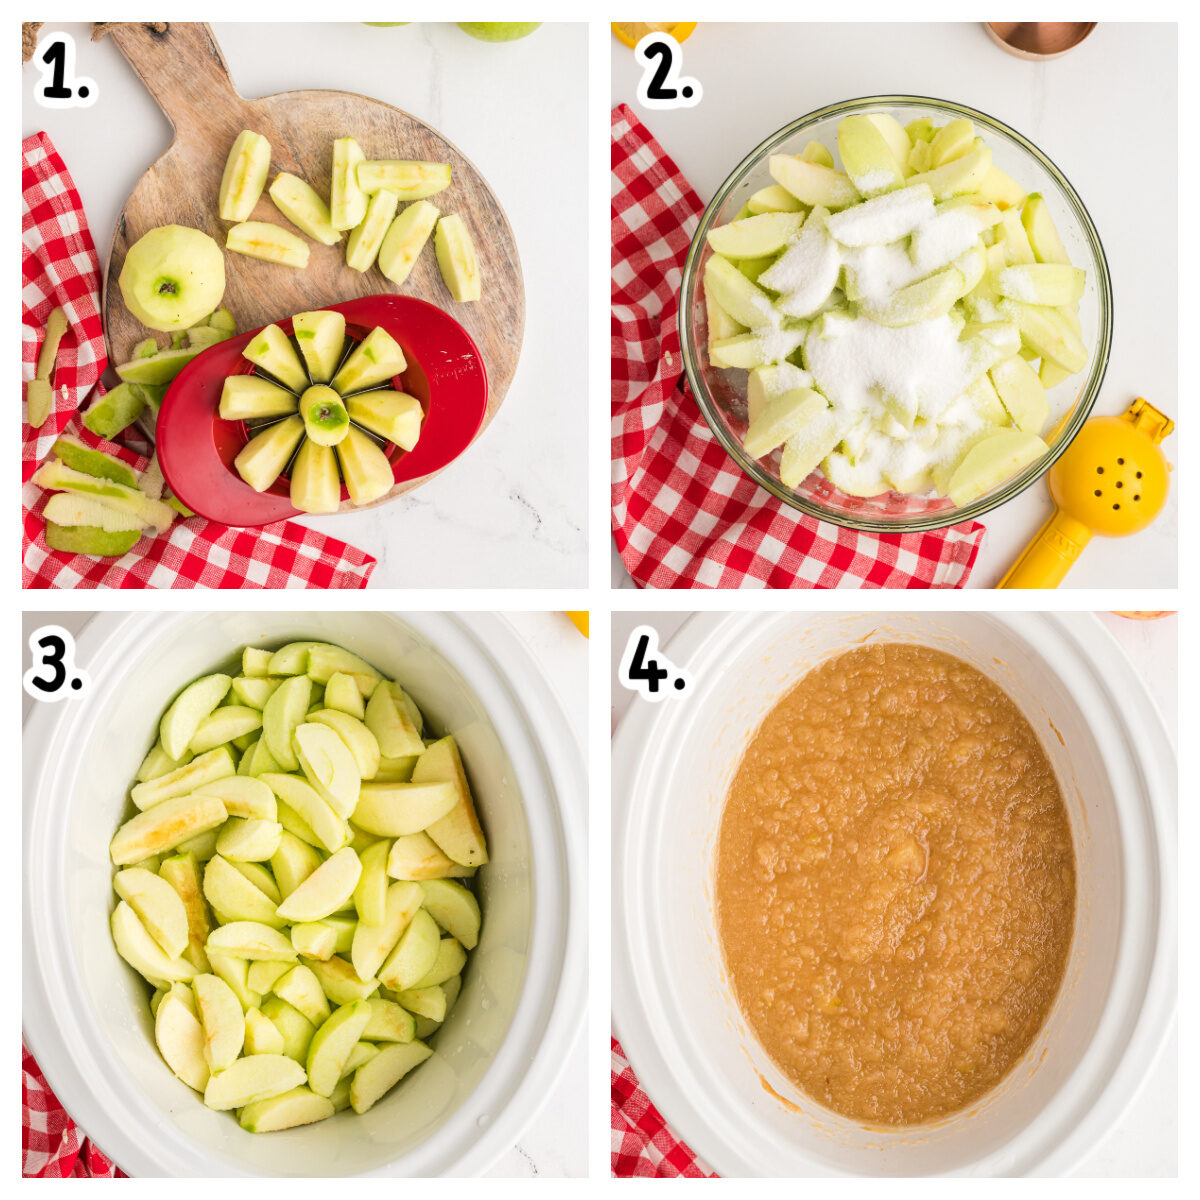 4 images about how to assemble applesauce in crockpot.